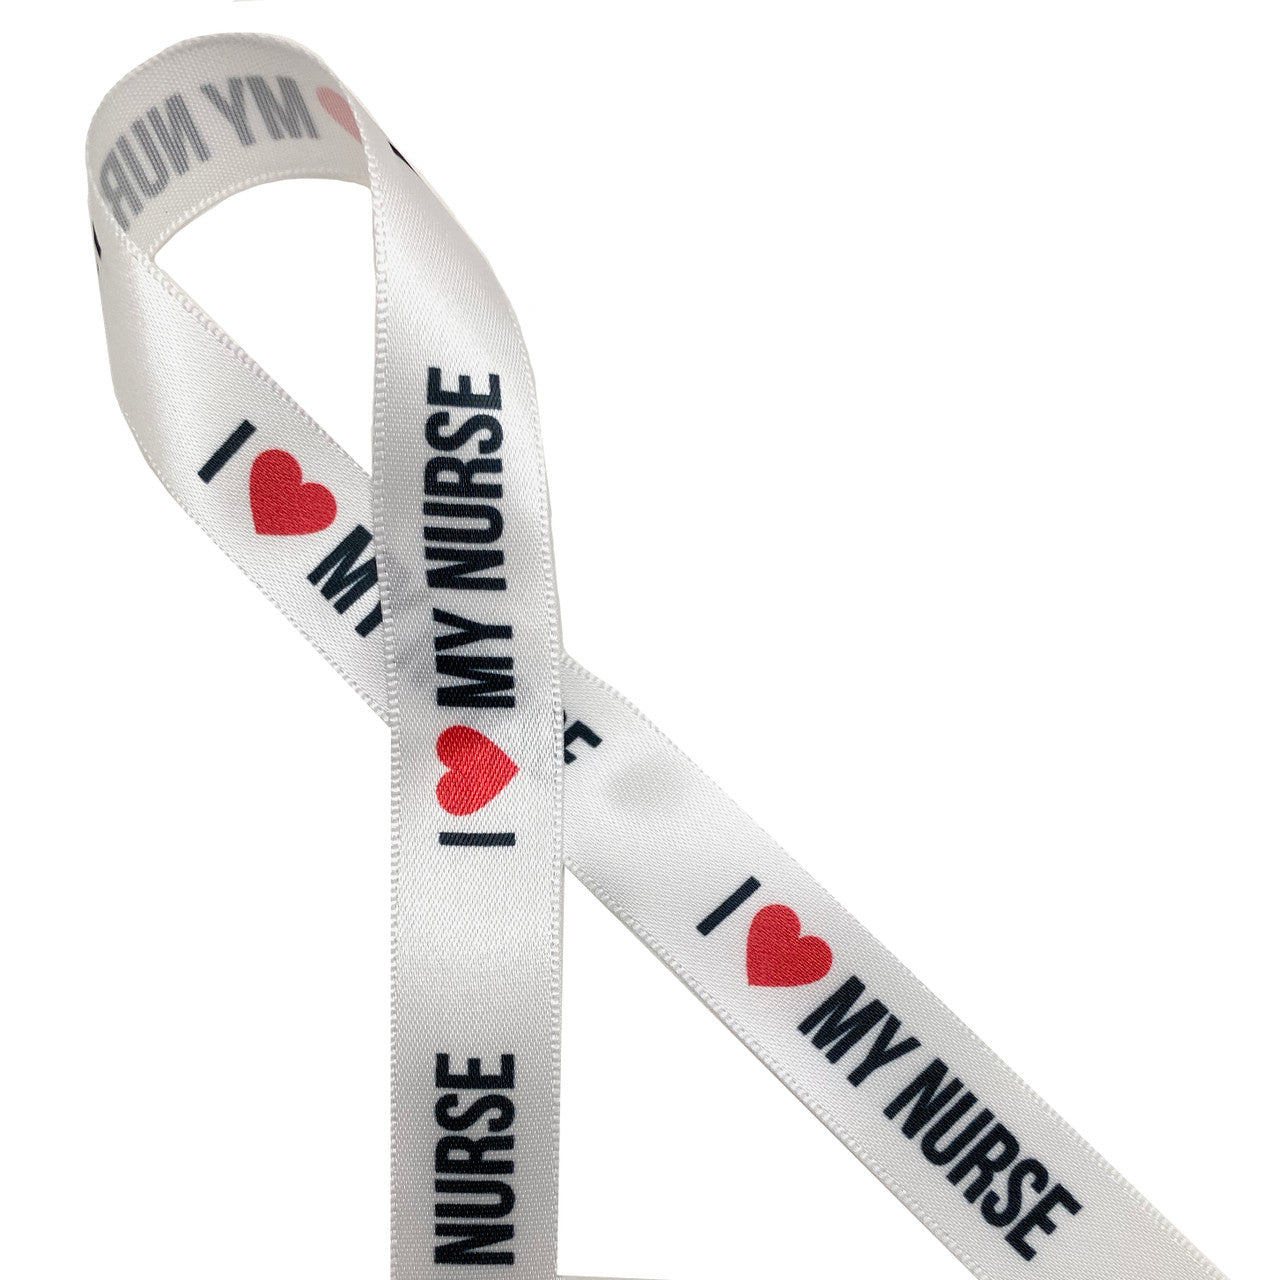 I ( Heart) my Nurse in black block lettering with a red heart printed on 5/8" white single face satin ribbon is the perfect way to express your gratitude for your favorite medical hero!